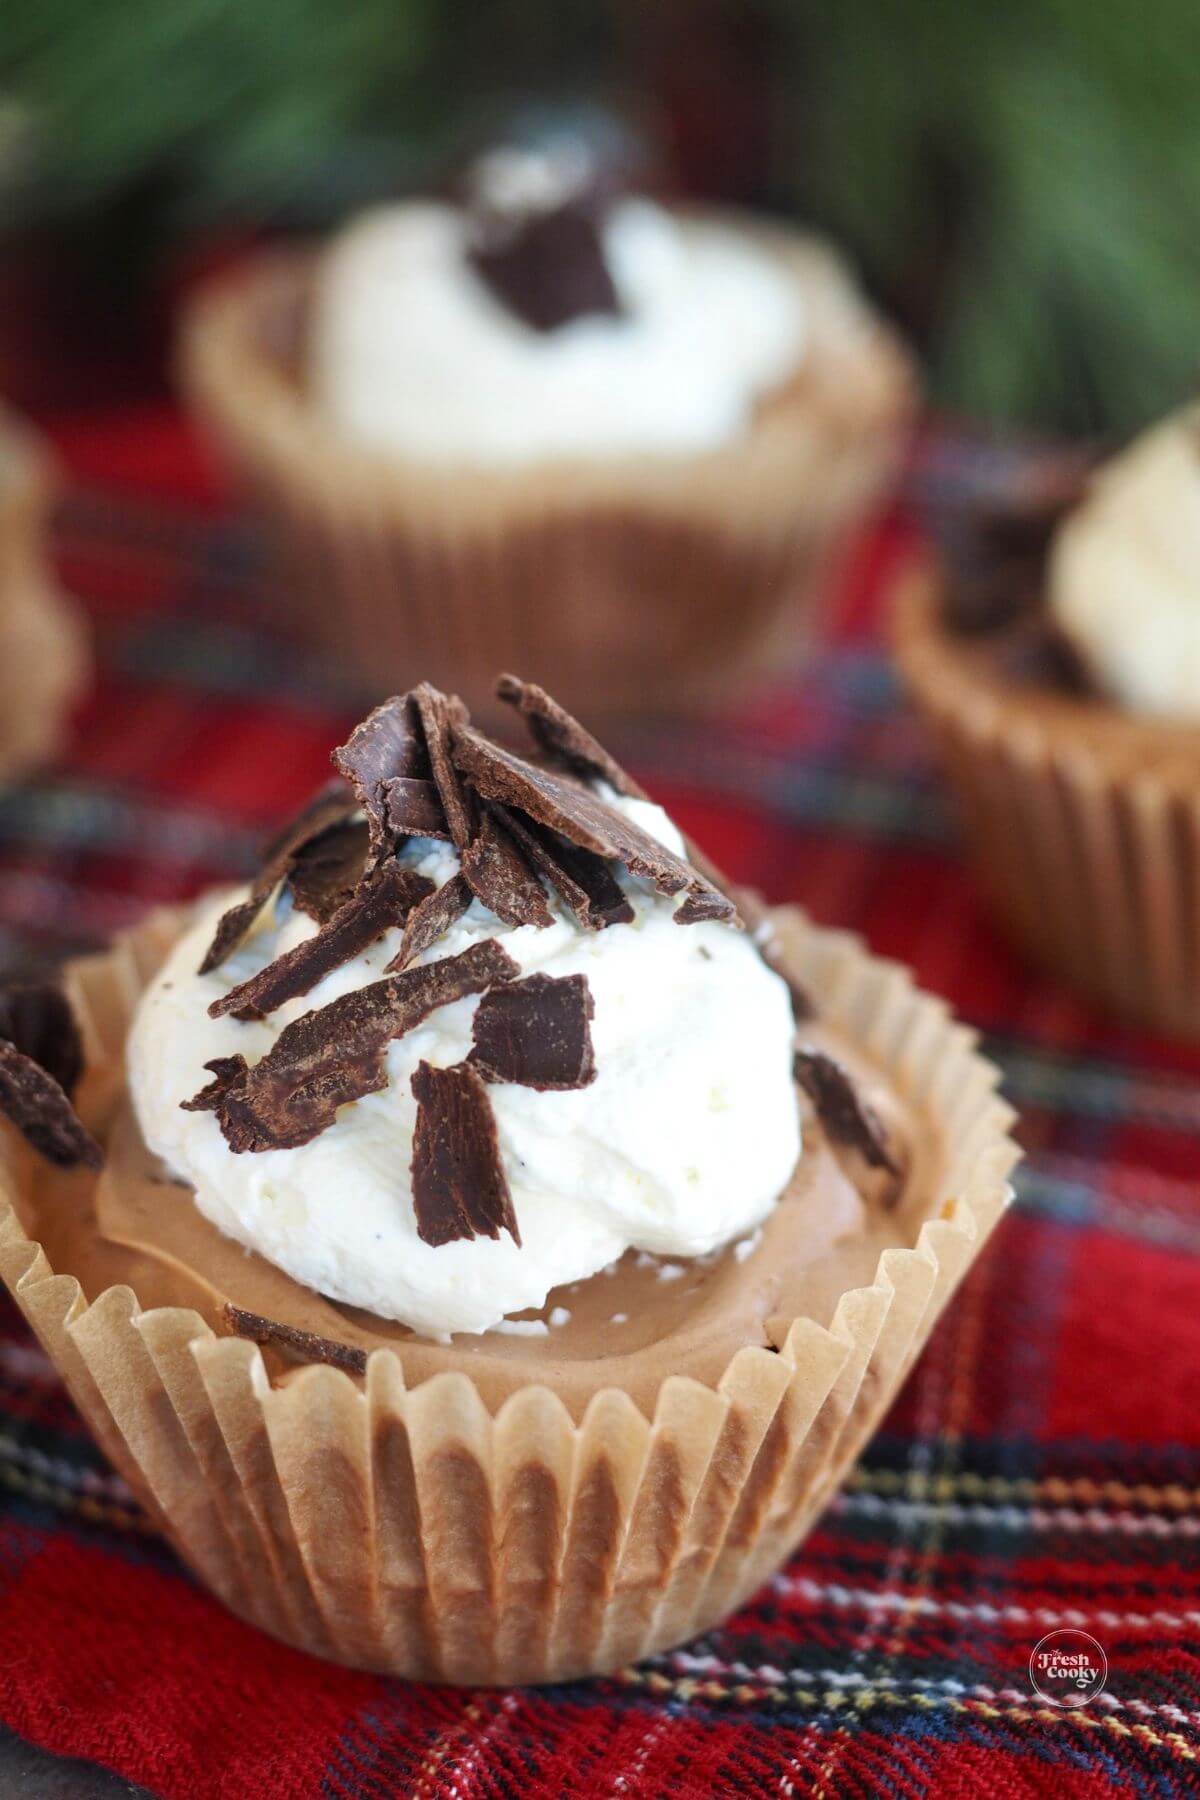 Mini chocolate pies in cupcake liners dressed up for Christmas.